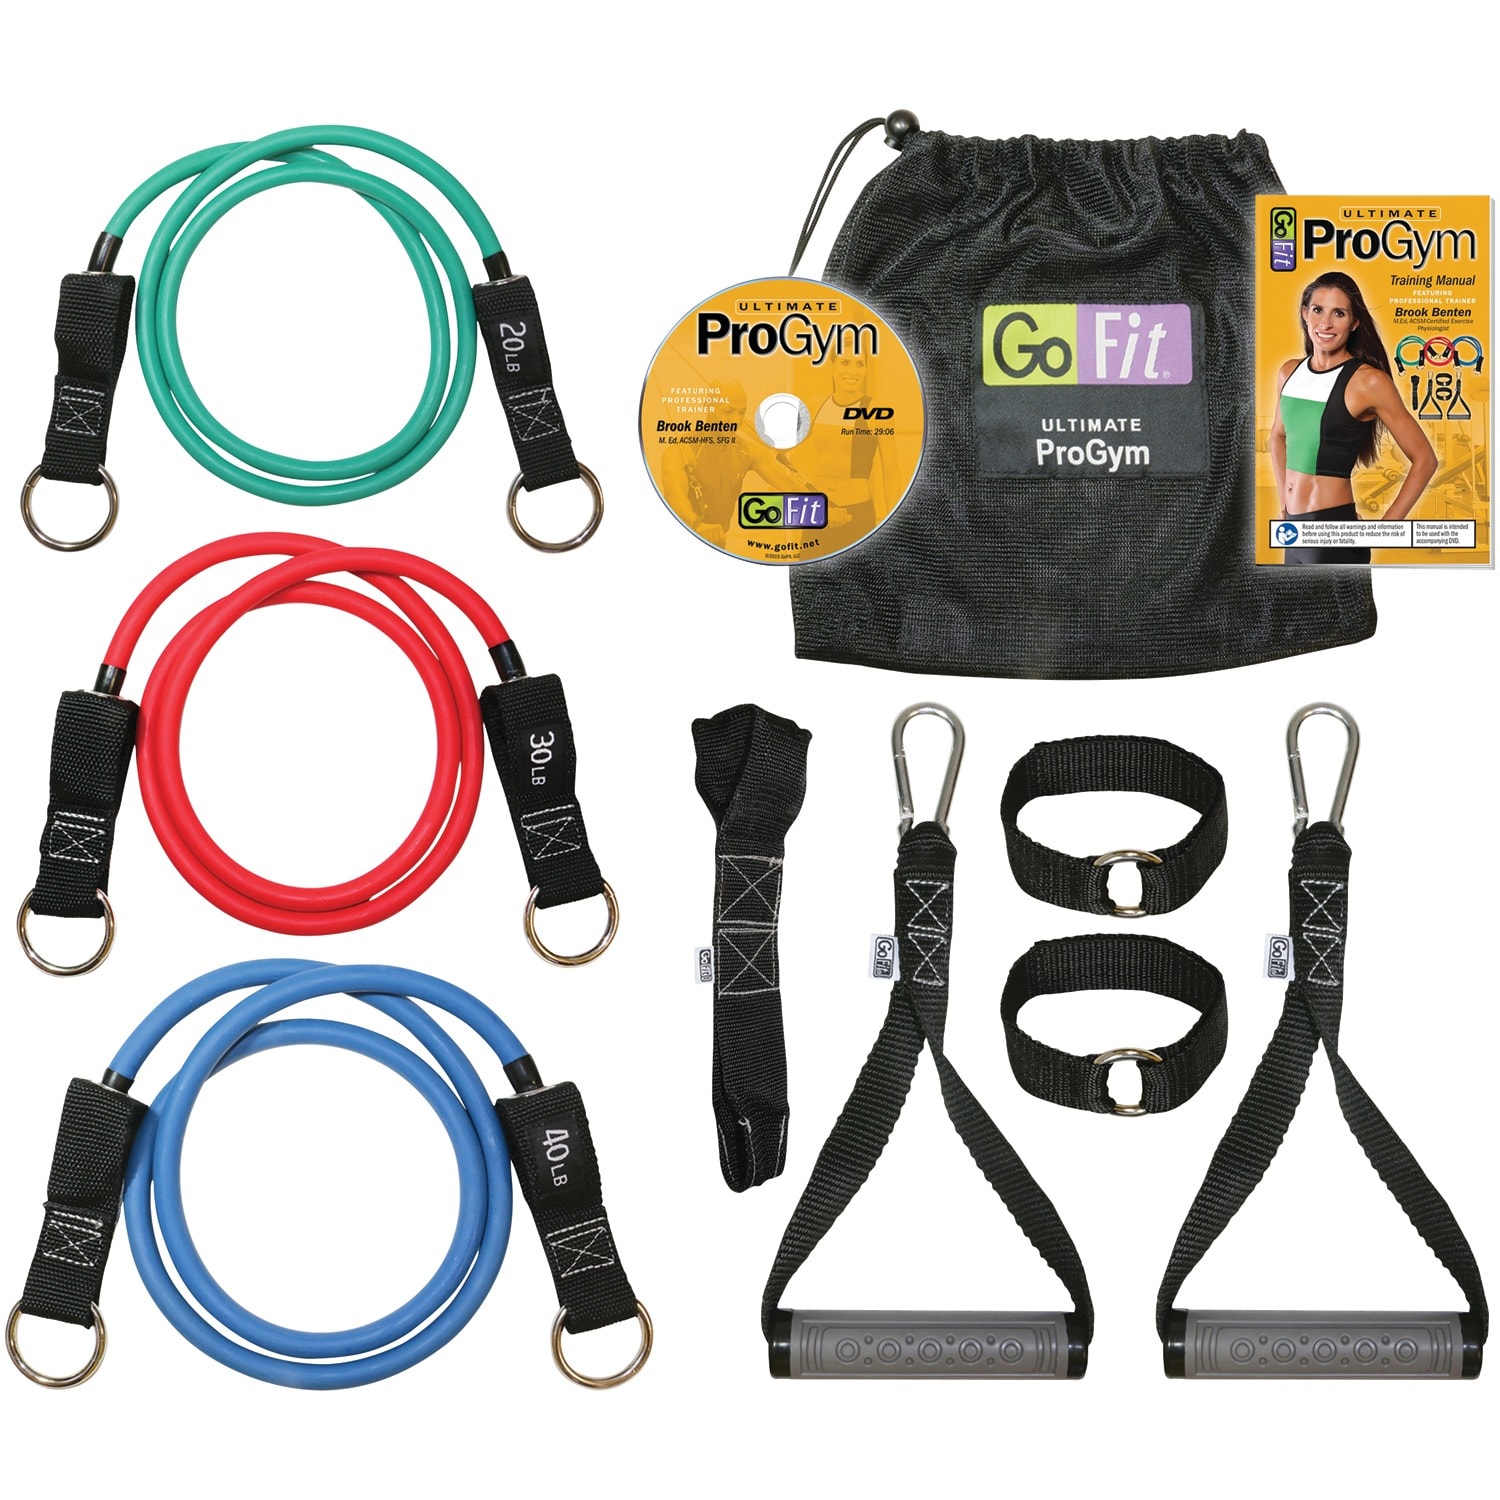 and Nylon Carry Bag 2 Ankle Straps GoFit Extreme ProGym for band Resistance Training 4 Resistance Tubes Training Manual 2 Handles 2 Door Anchors